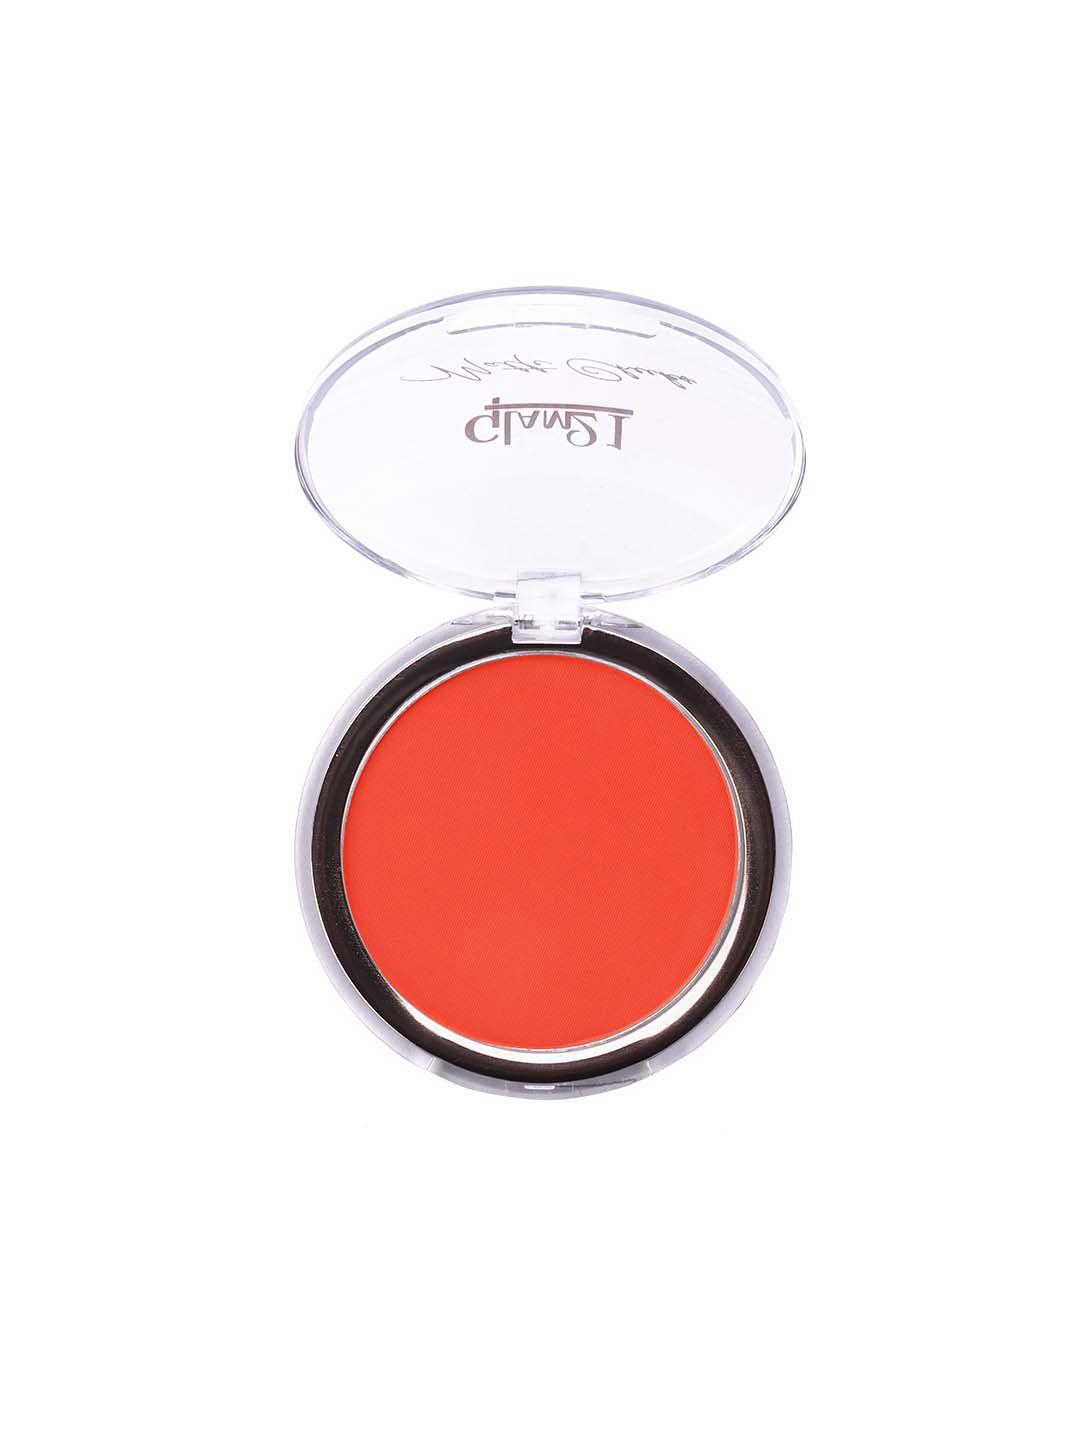 glam21 matte cheek perfect pop of color blush 5 g - shade 08